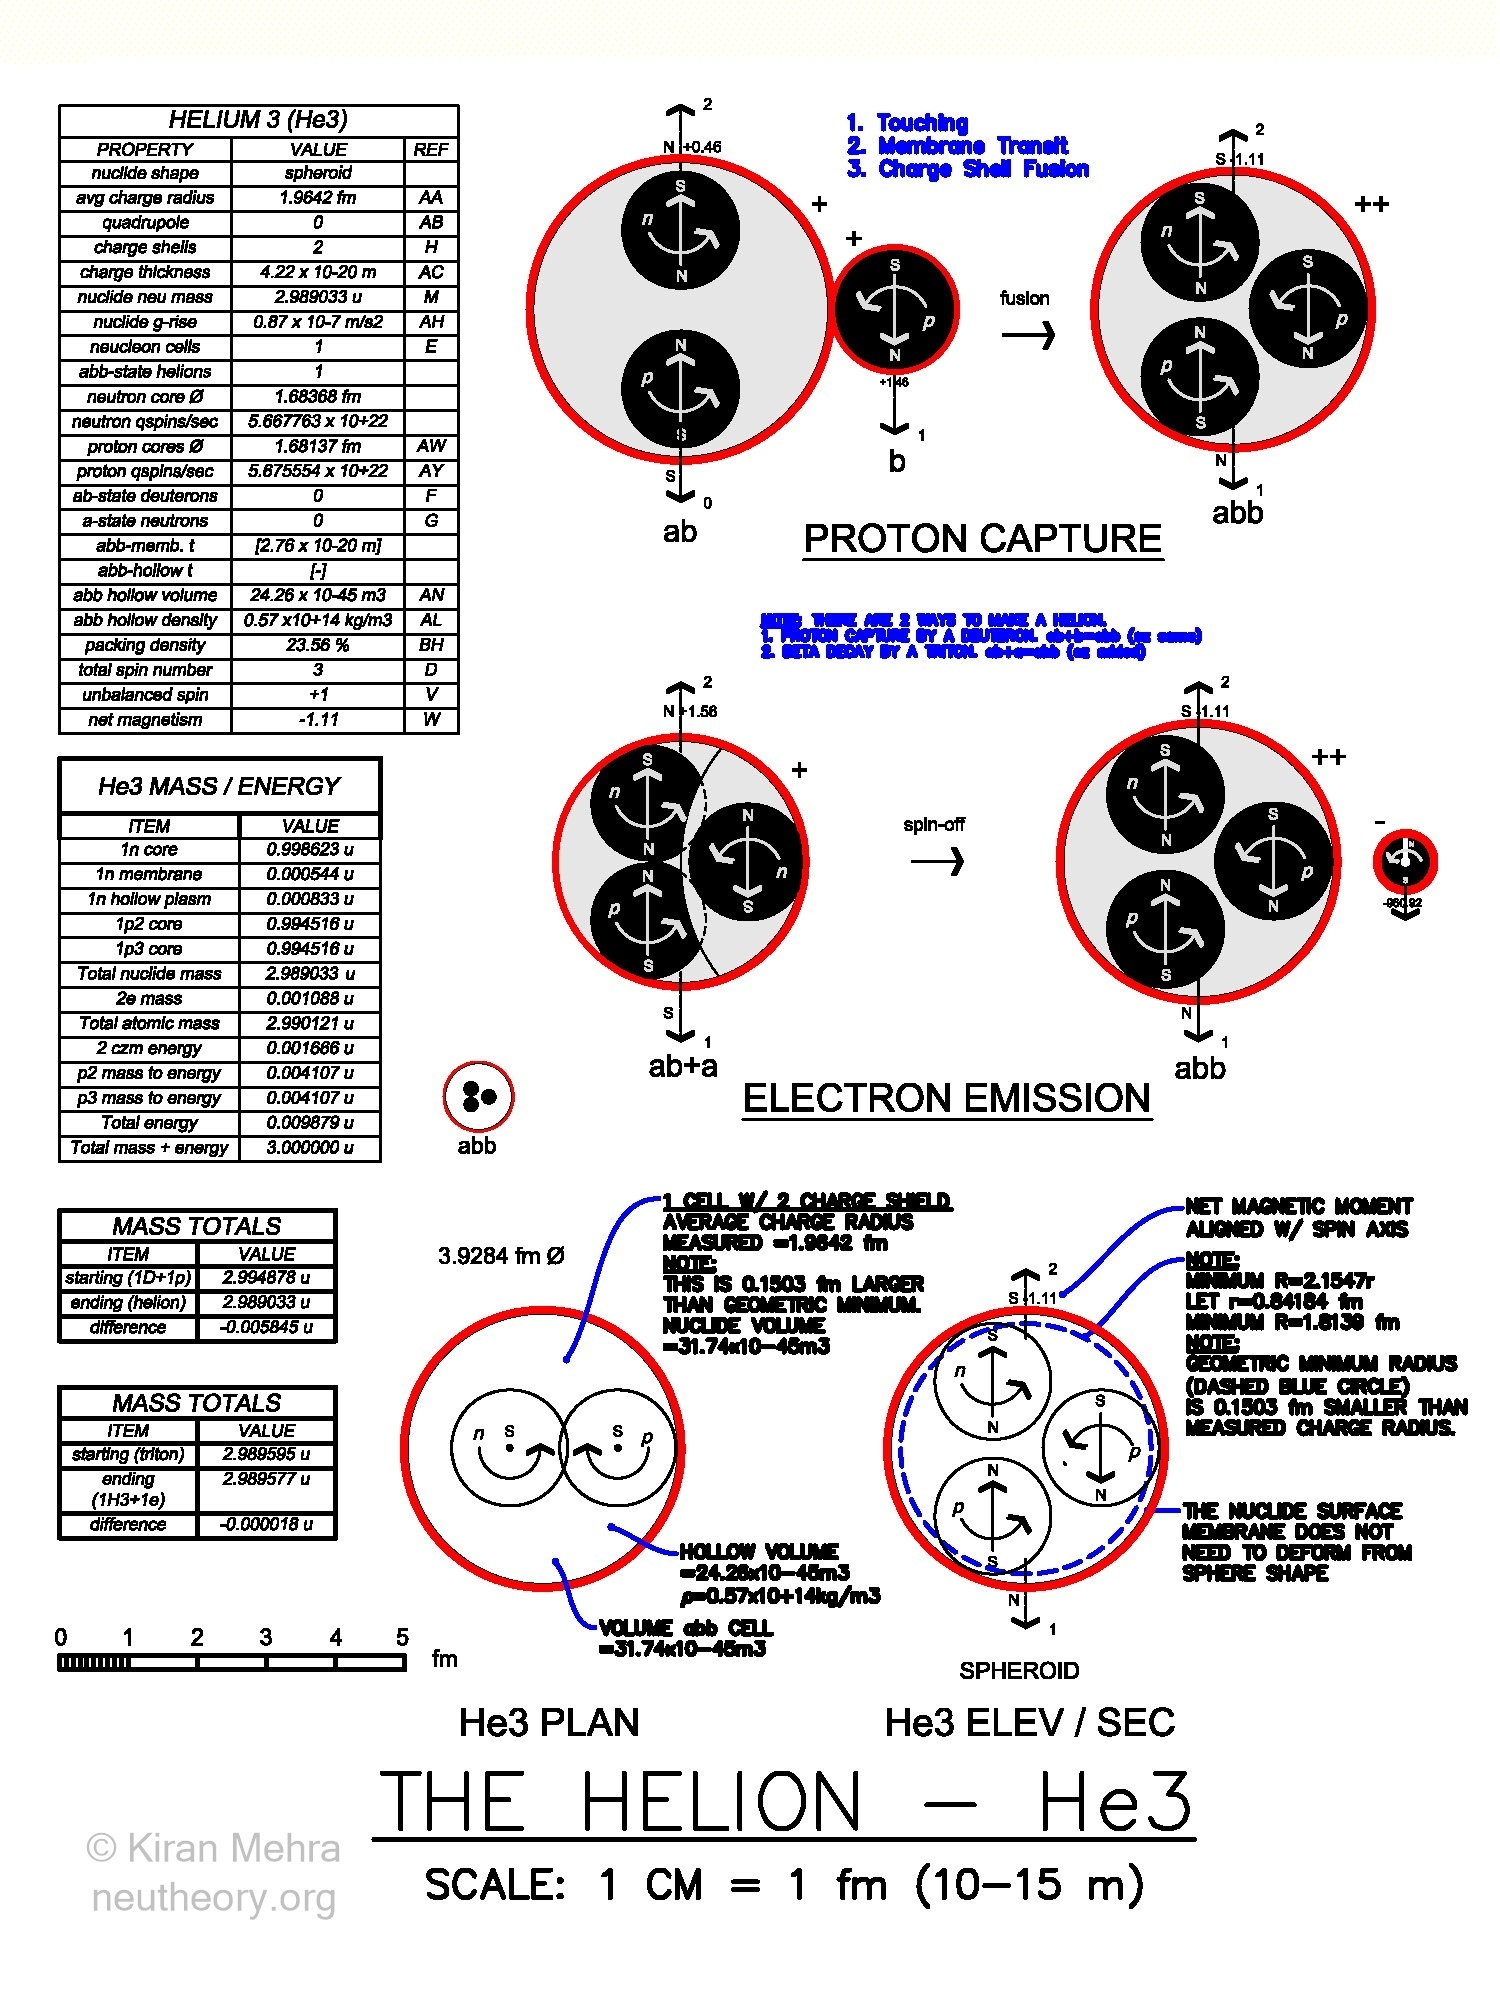 red circles with black balls and text showing two methods by which the helium-3 nuclide is synthesized